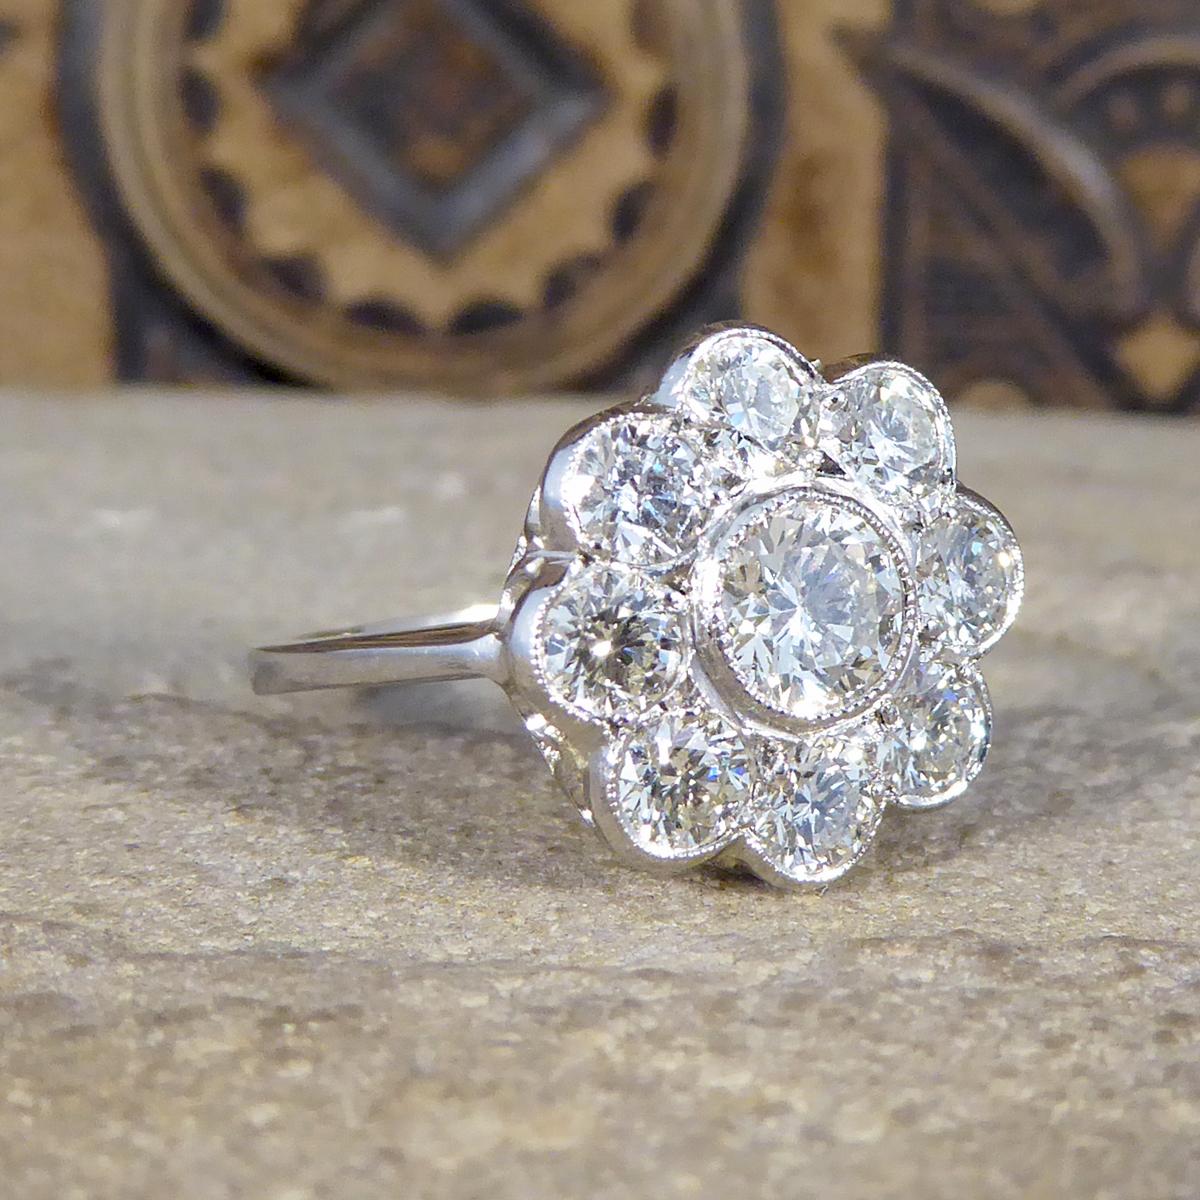 This fabulous Contemporary Daisy cluster ring dazzles on the hand with a total of 1.70ct of Diamonds. With the centre stone being a Round Brilliant cut stone weighing approximately 0.50ct, surrounded by 8 Round Brilliant cut Diamonds weighing